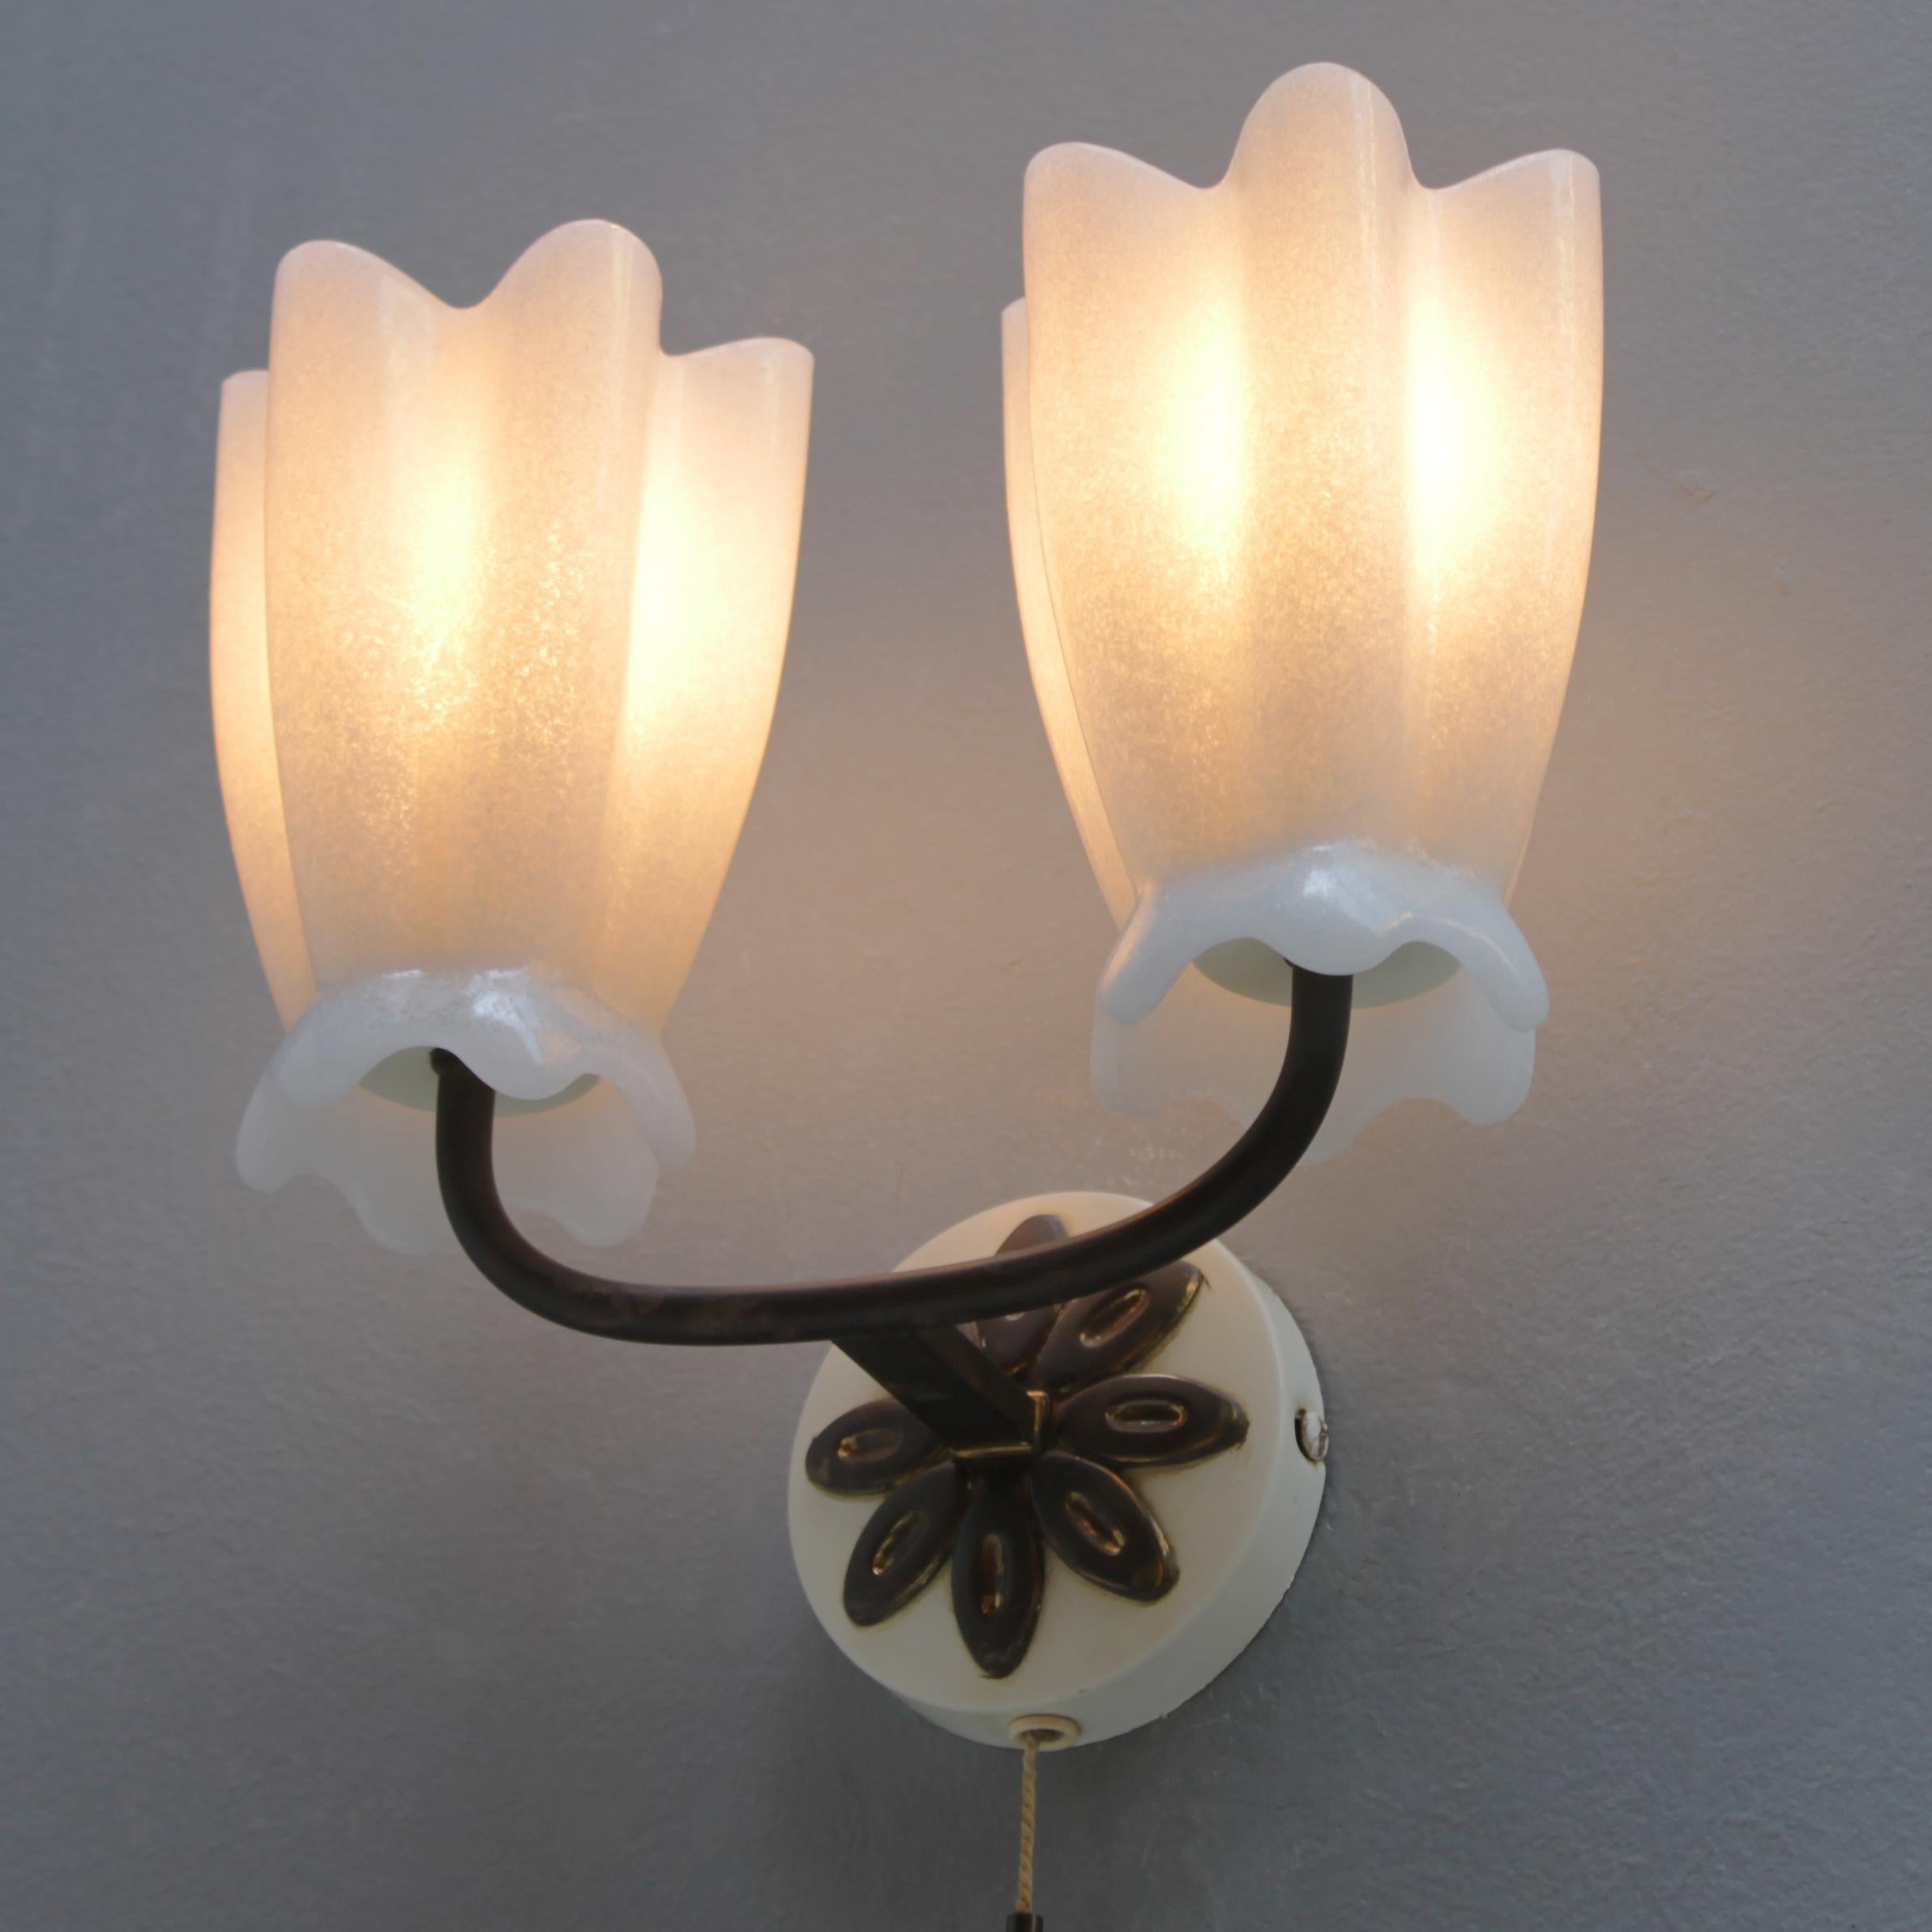 Mid-20th Century Ernest Igl Wall Lamp for Hillebrand, Germany